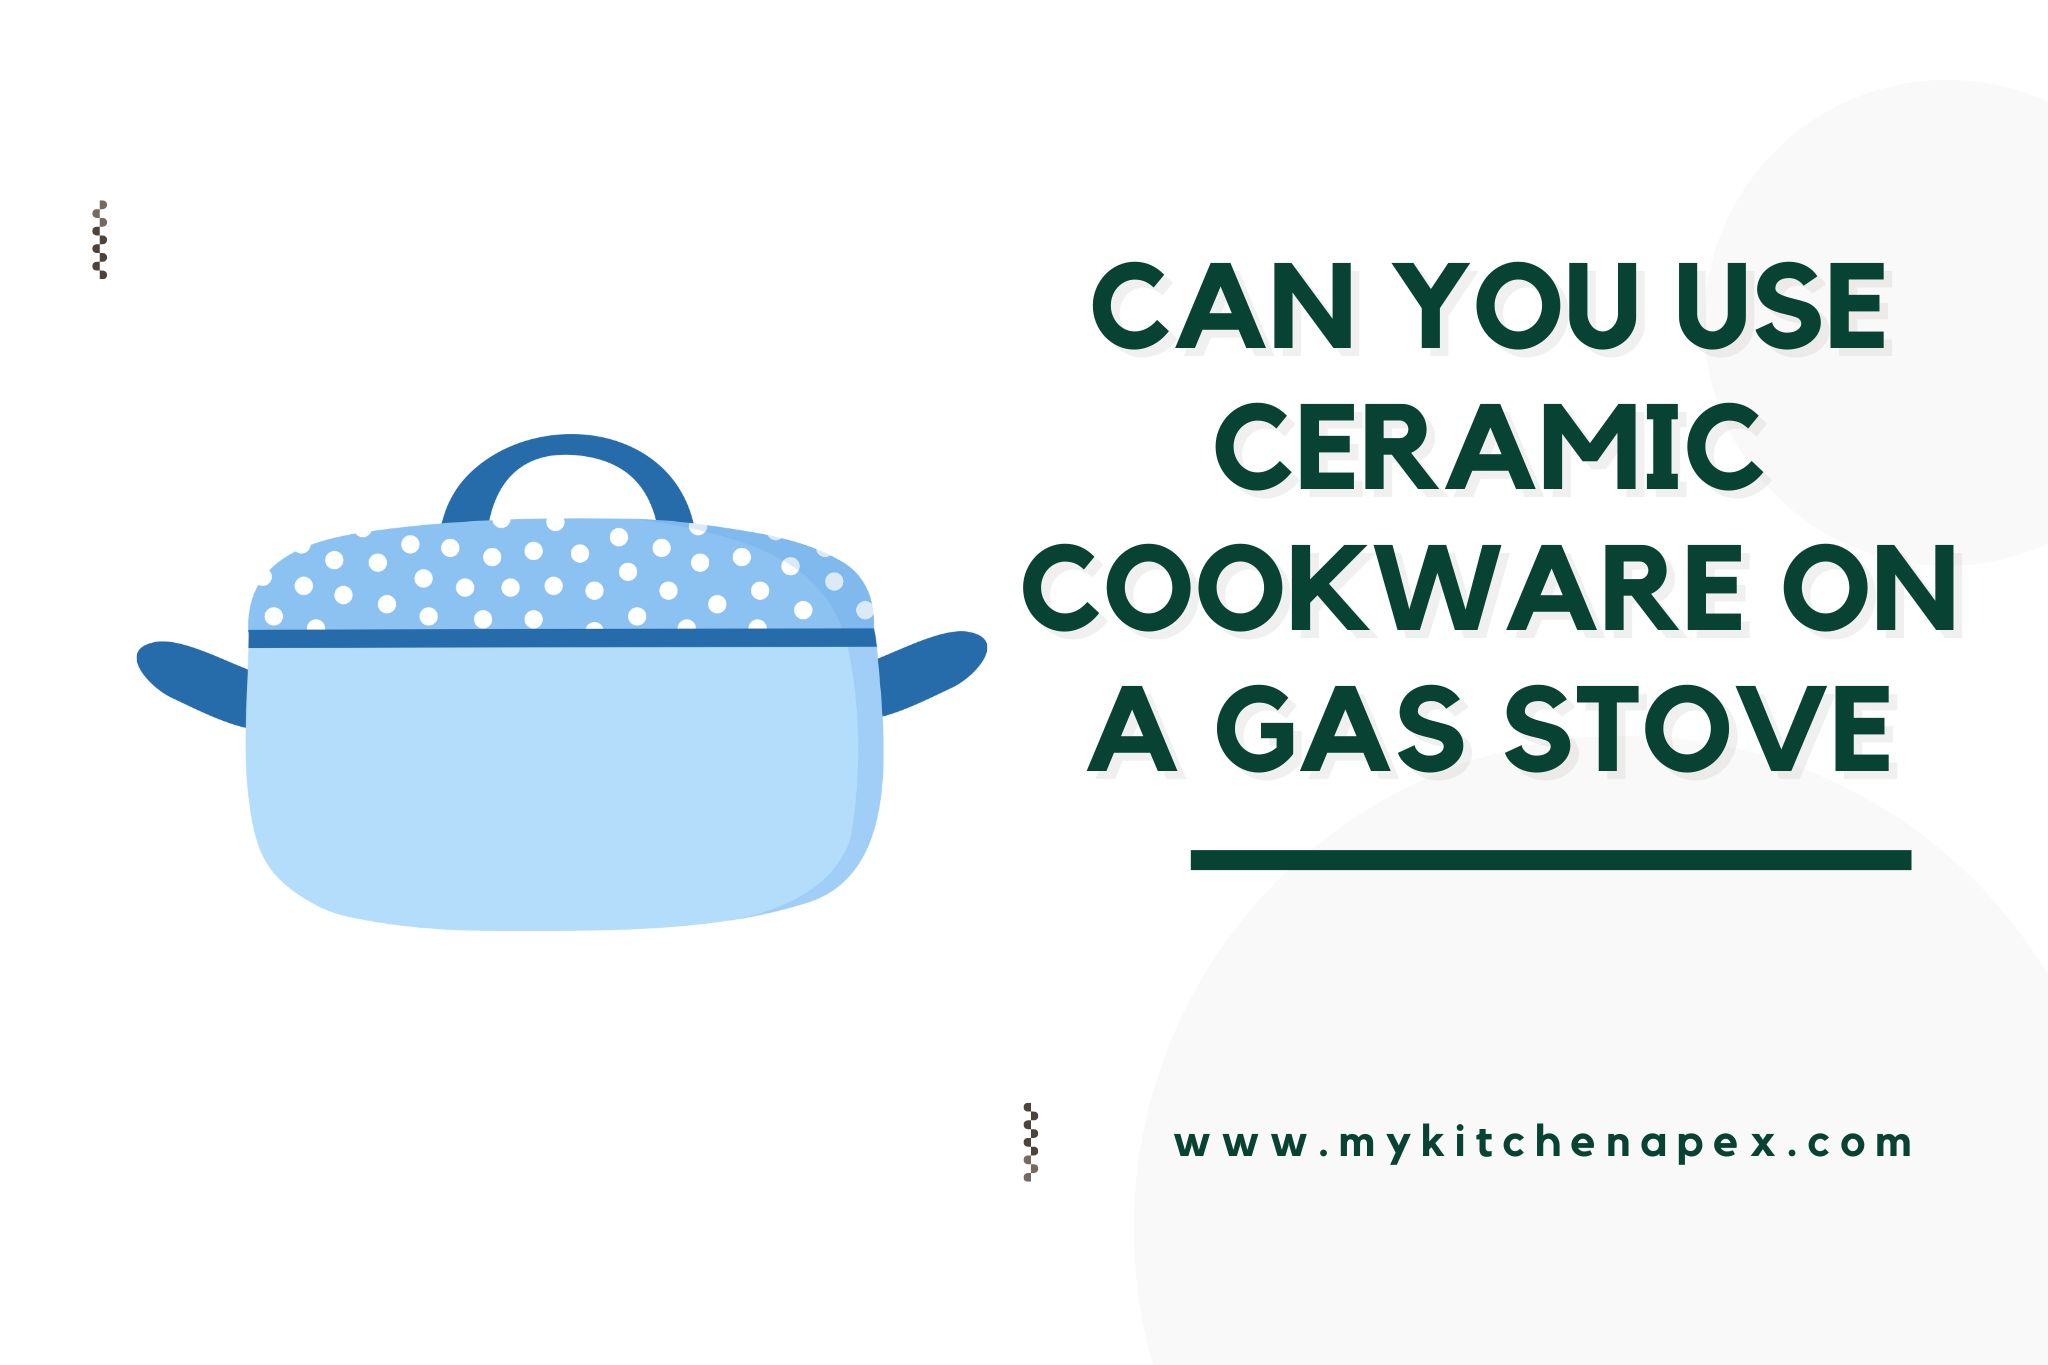 can you use ceramic cookware on a gas stove